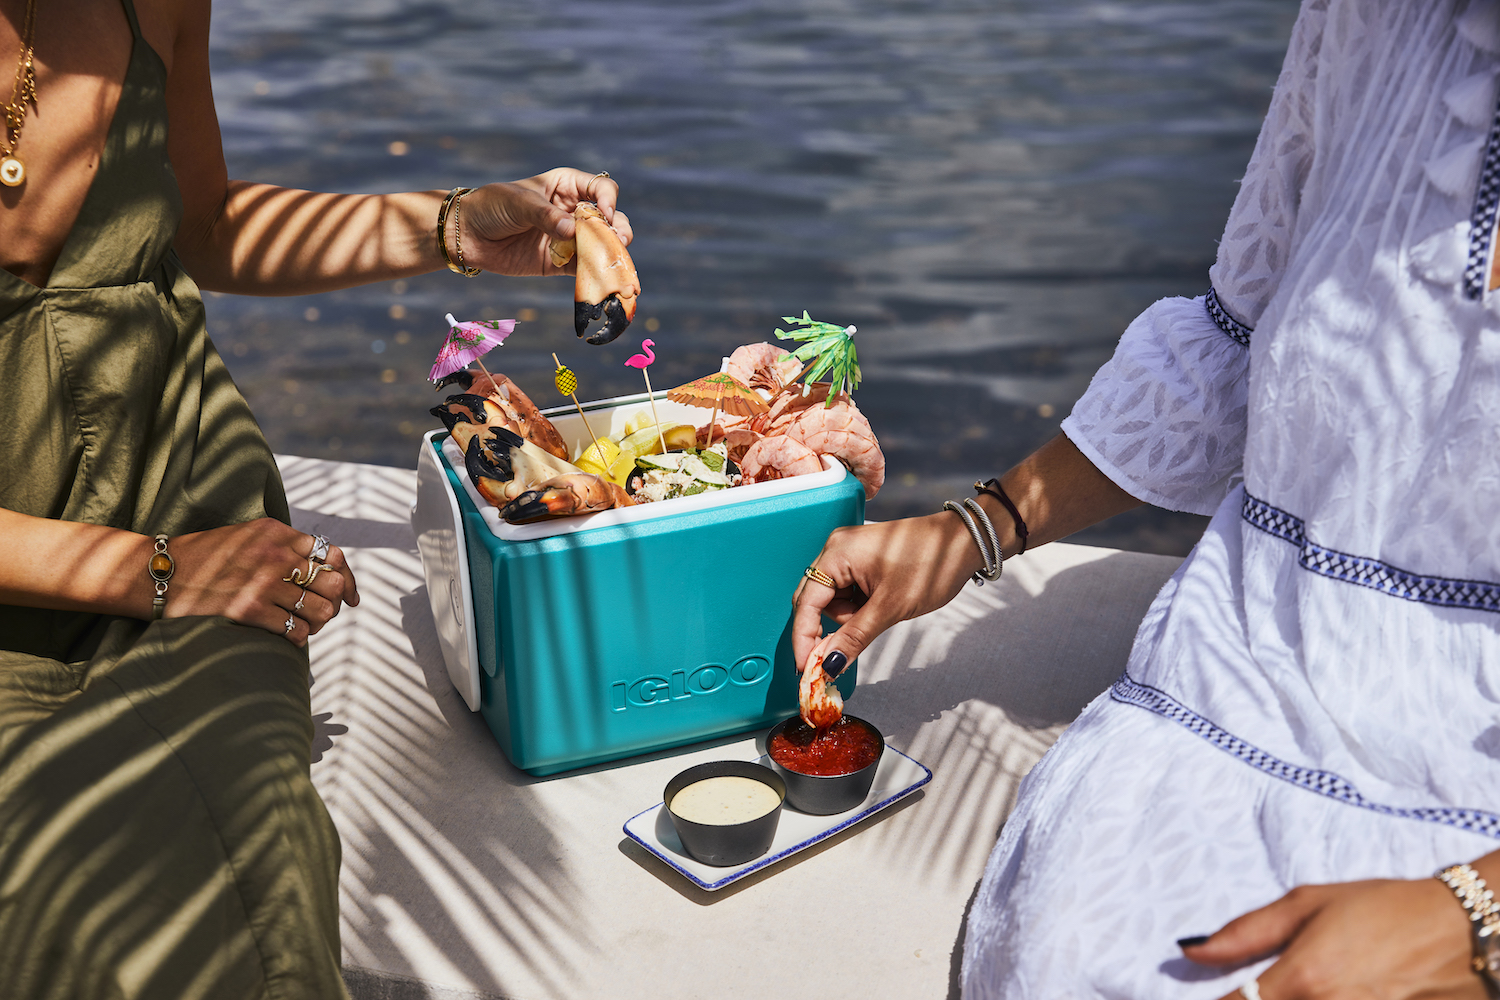 Stone crab in a cooler on a boat